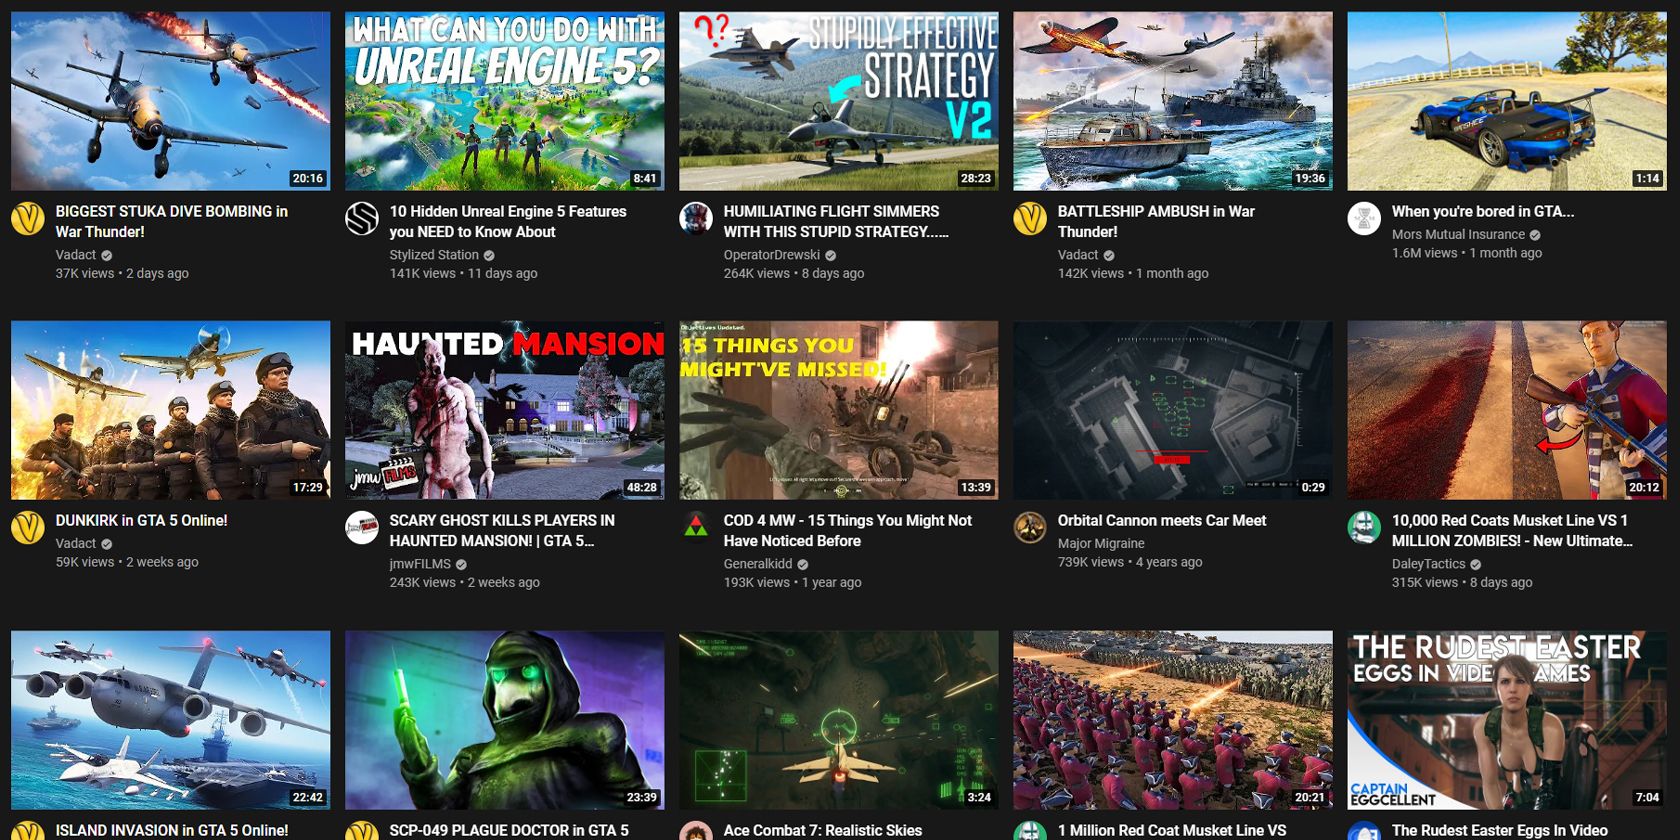 Suggested YouTube gaming video content